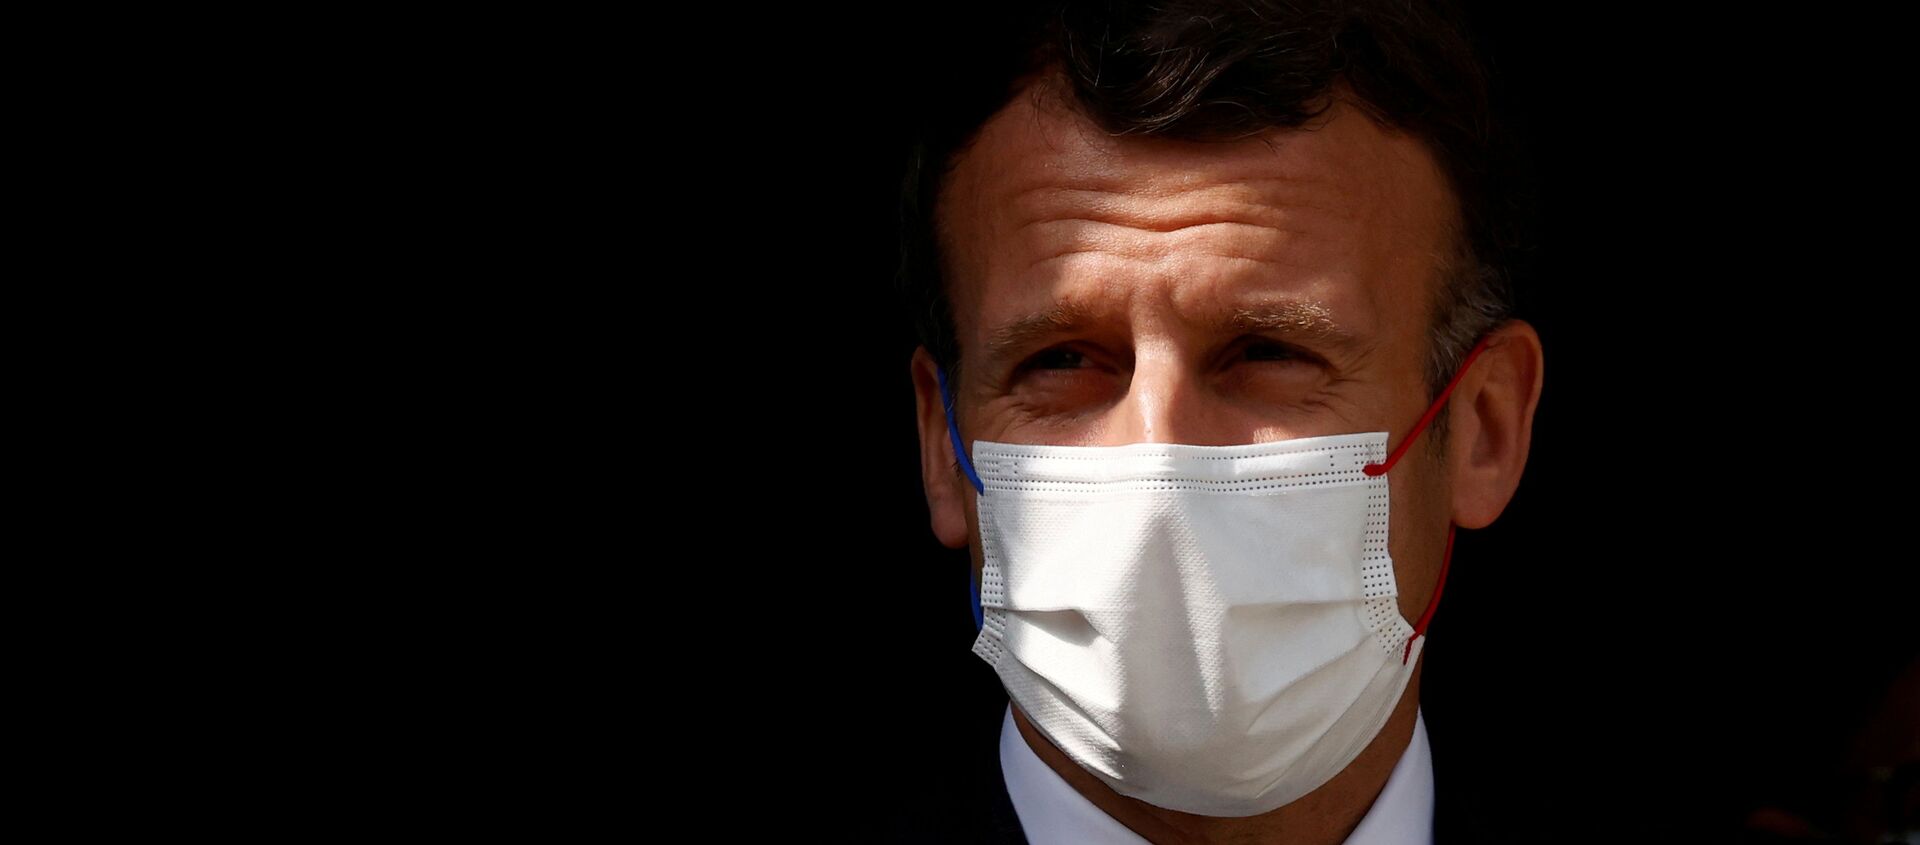 French President Emmanuel Macron, wearing a protective face mask, visits a child psychiatry department at Reims hospital to discuss the psychological impact of the COVID-19 crisis and the lockdown on children and teenagers in France, April 14, 2021.  - Sputnik International, 1920